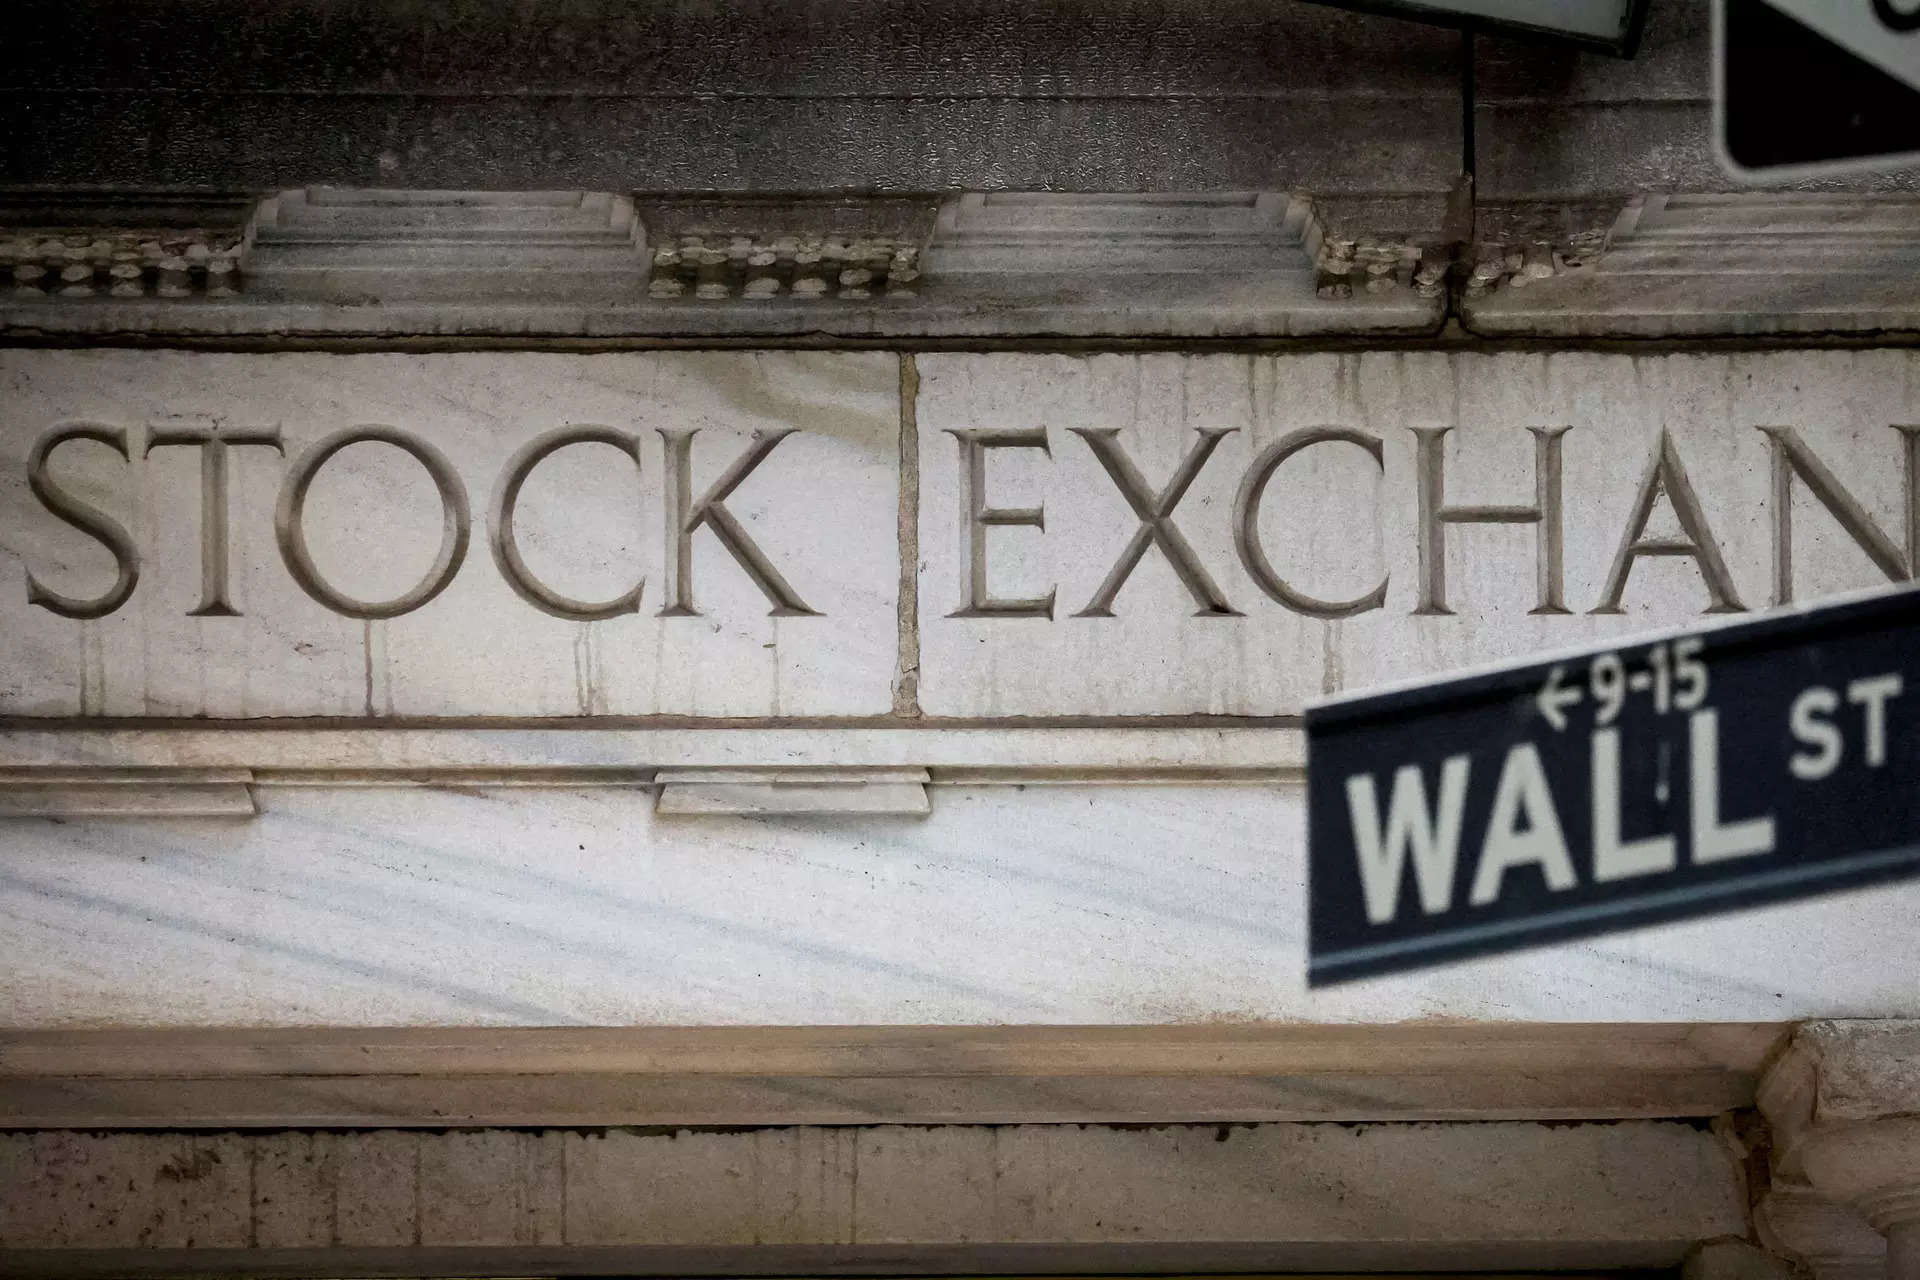 Wall Street rises on growing hopes for Fed rate cuts